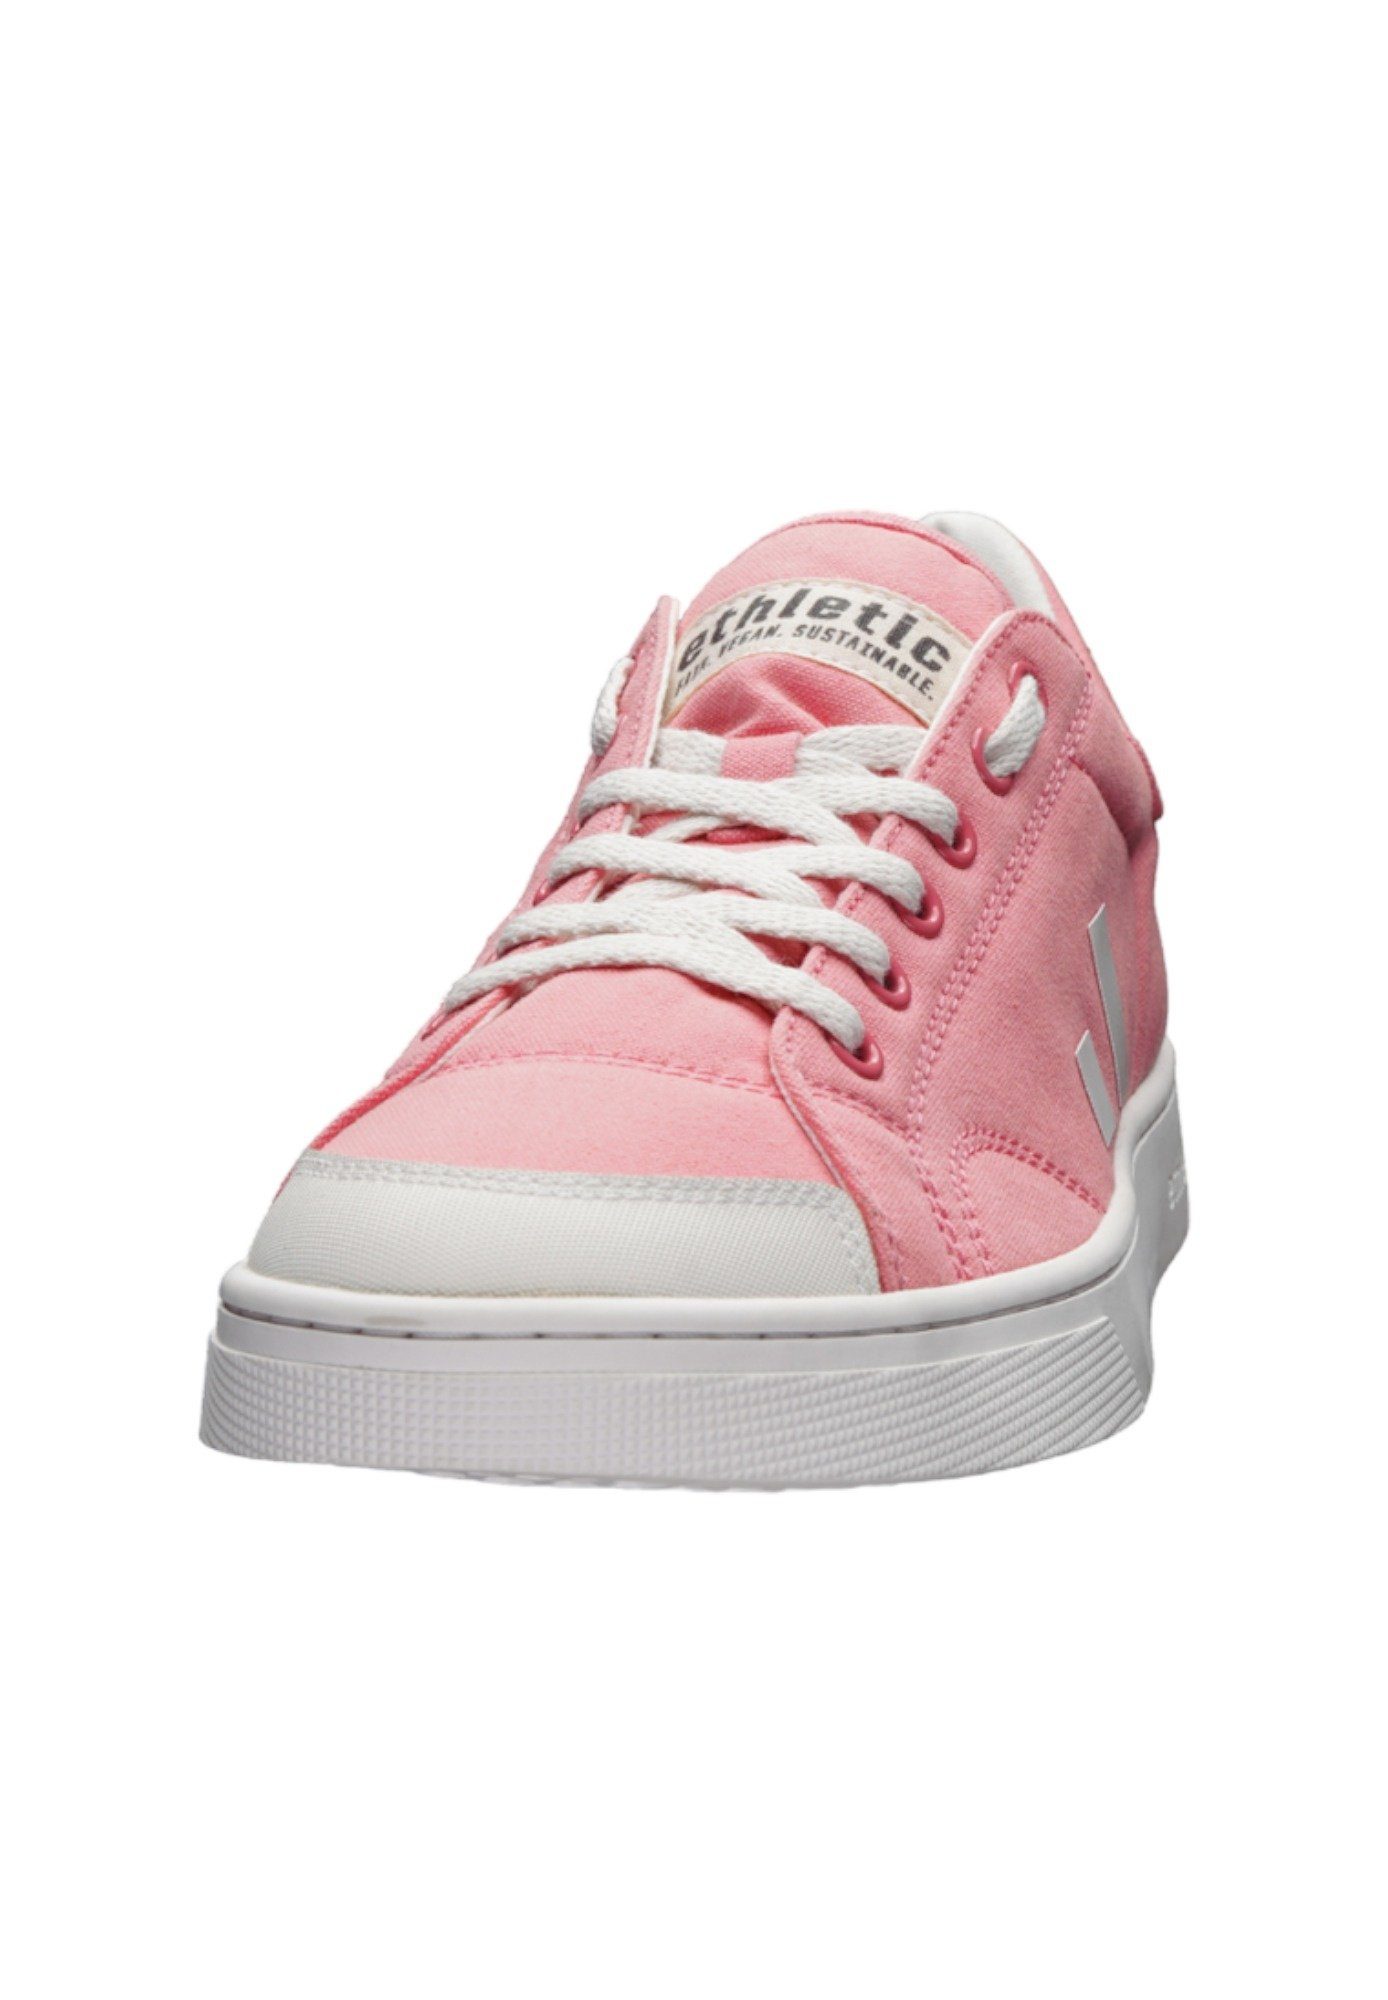 ETHLETIC Active Lo Cut Sneaker Fairtrade Produkt Strawberry Pink - Just White